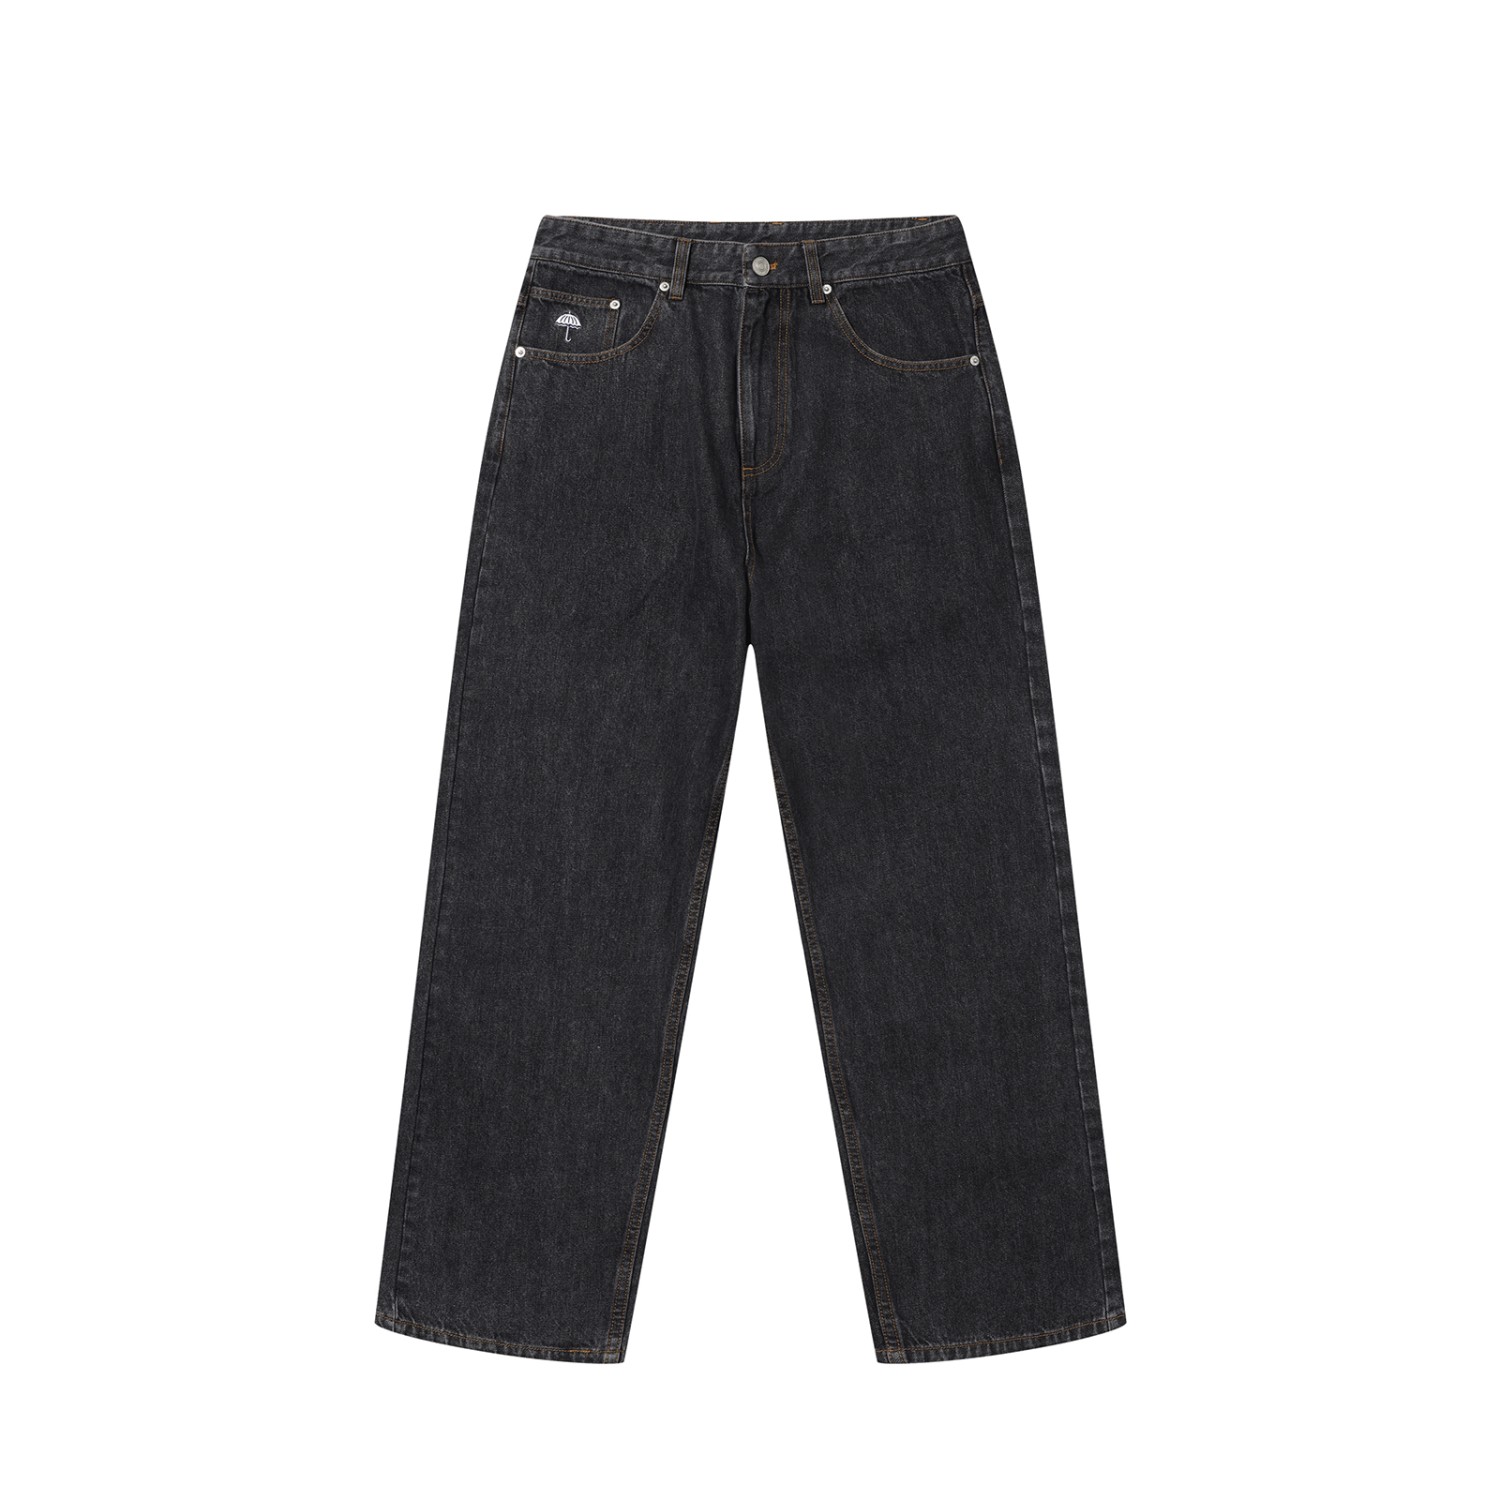 CLASSIC JEANS PANT WASHED BLACK